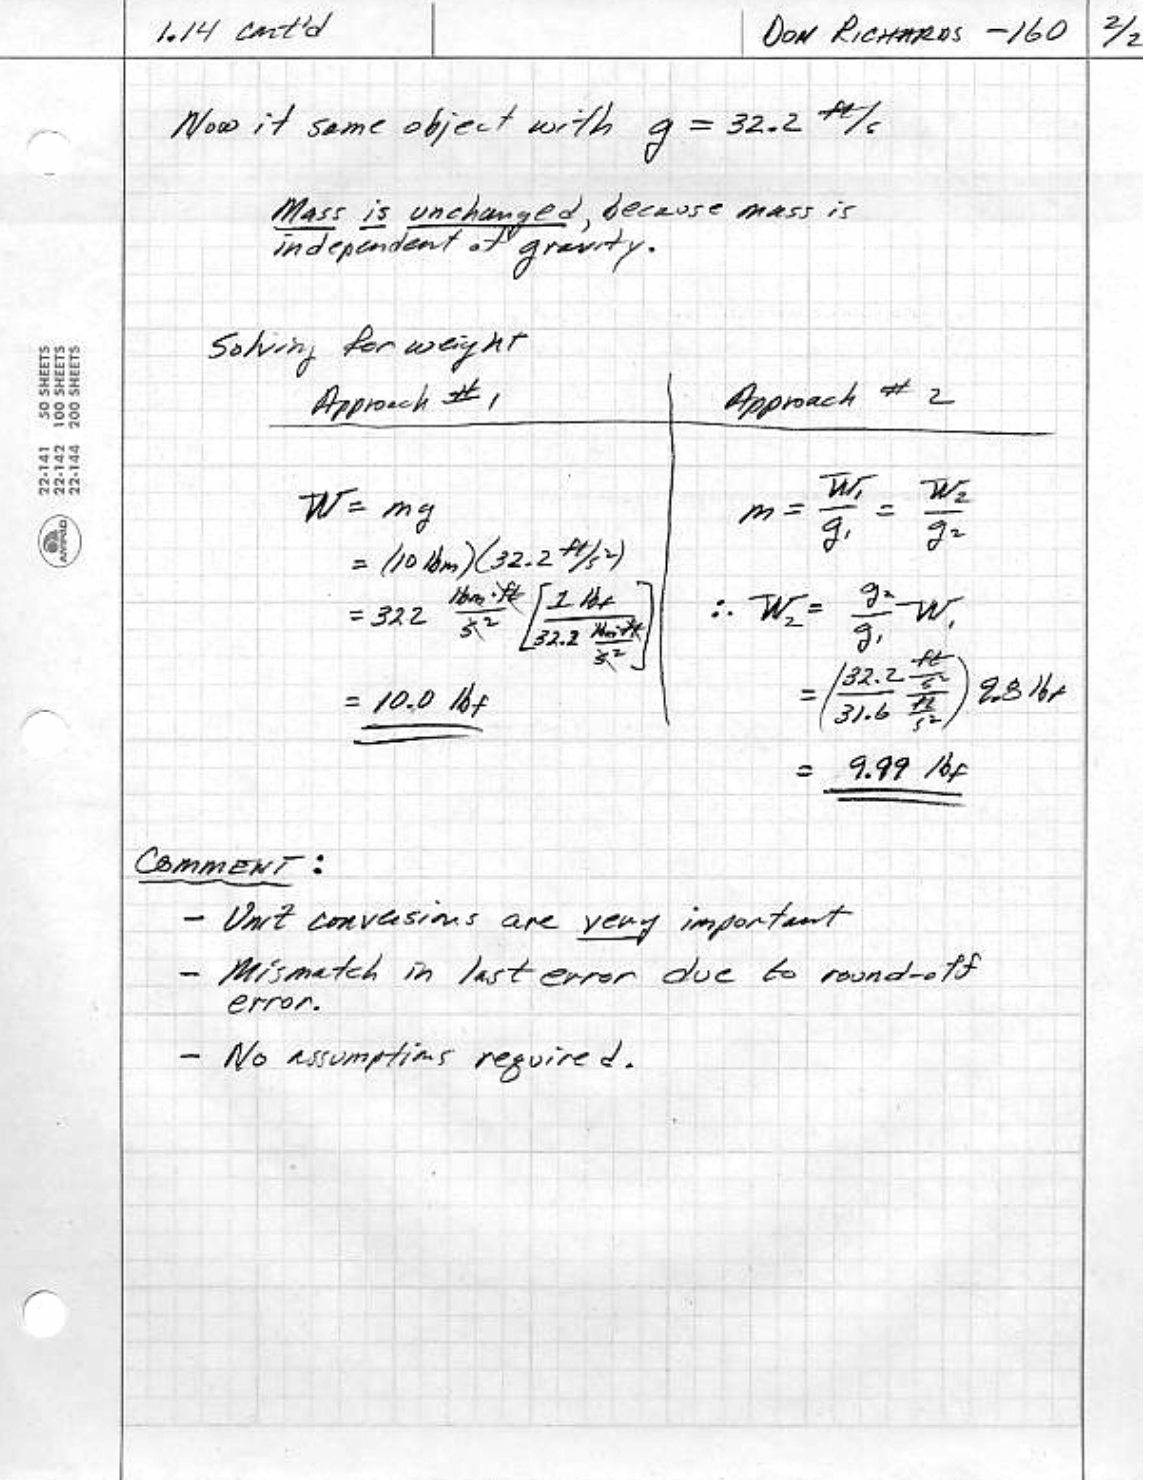 Page 2 of 2 of Don Richards' solution to problem 1.14, showing two approaches for solving for the object weight and comments on the importance of unit conversions and the possibility of rounding errors.